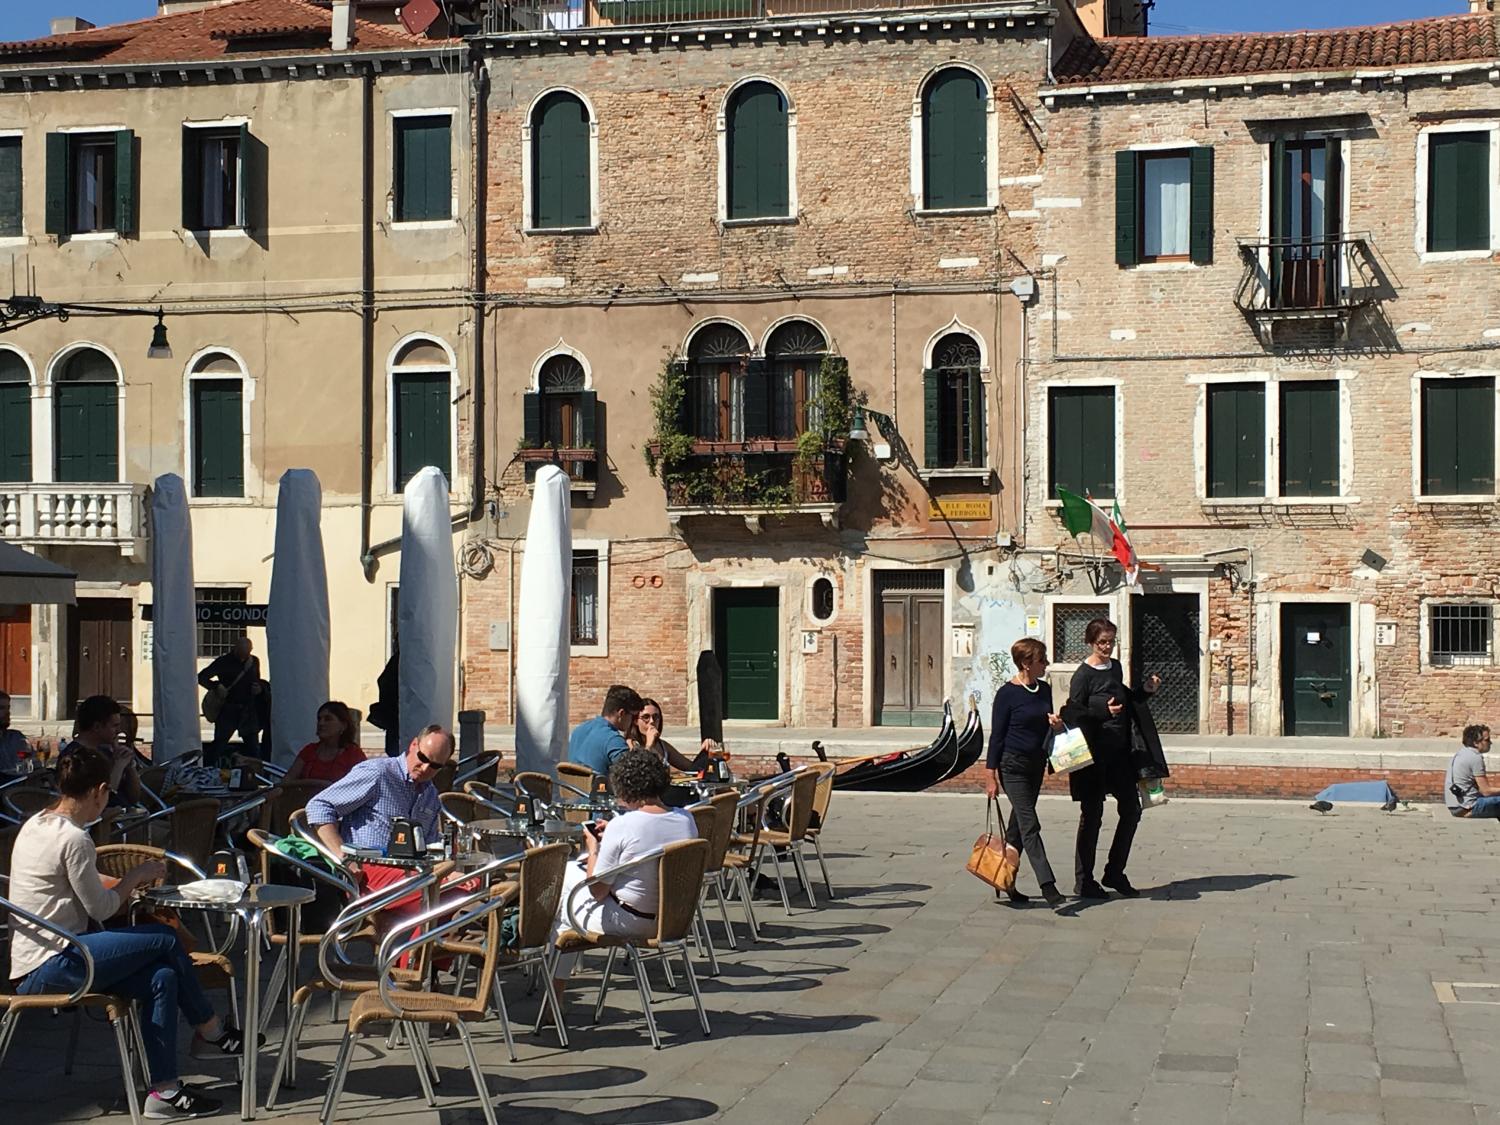 Lunching in the sunny Campo San Barnaba